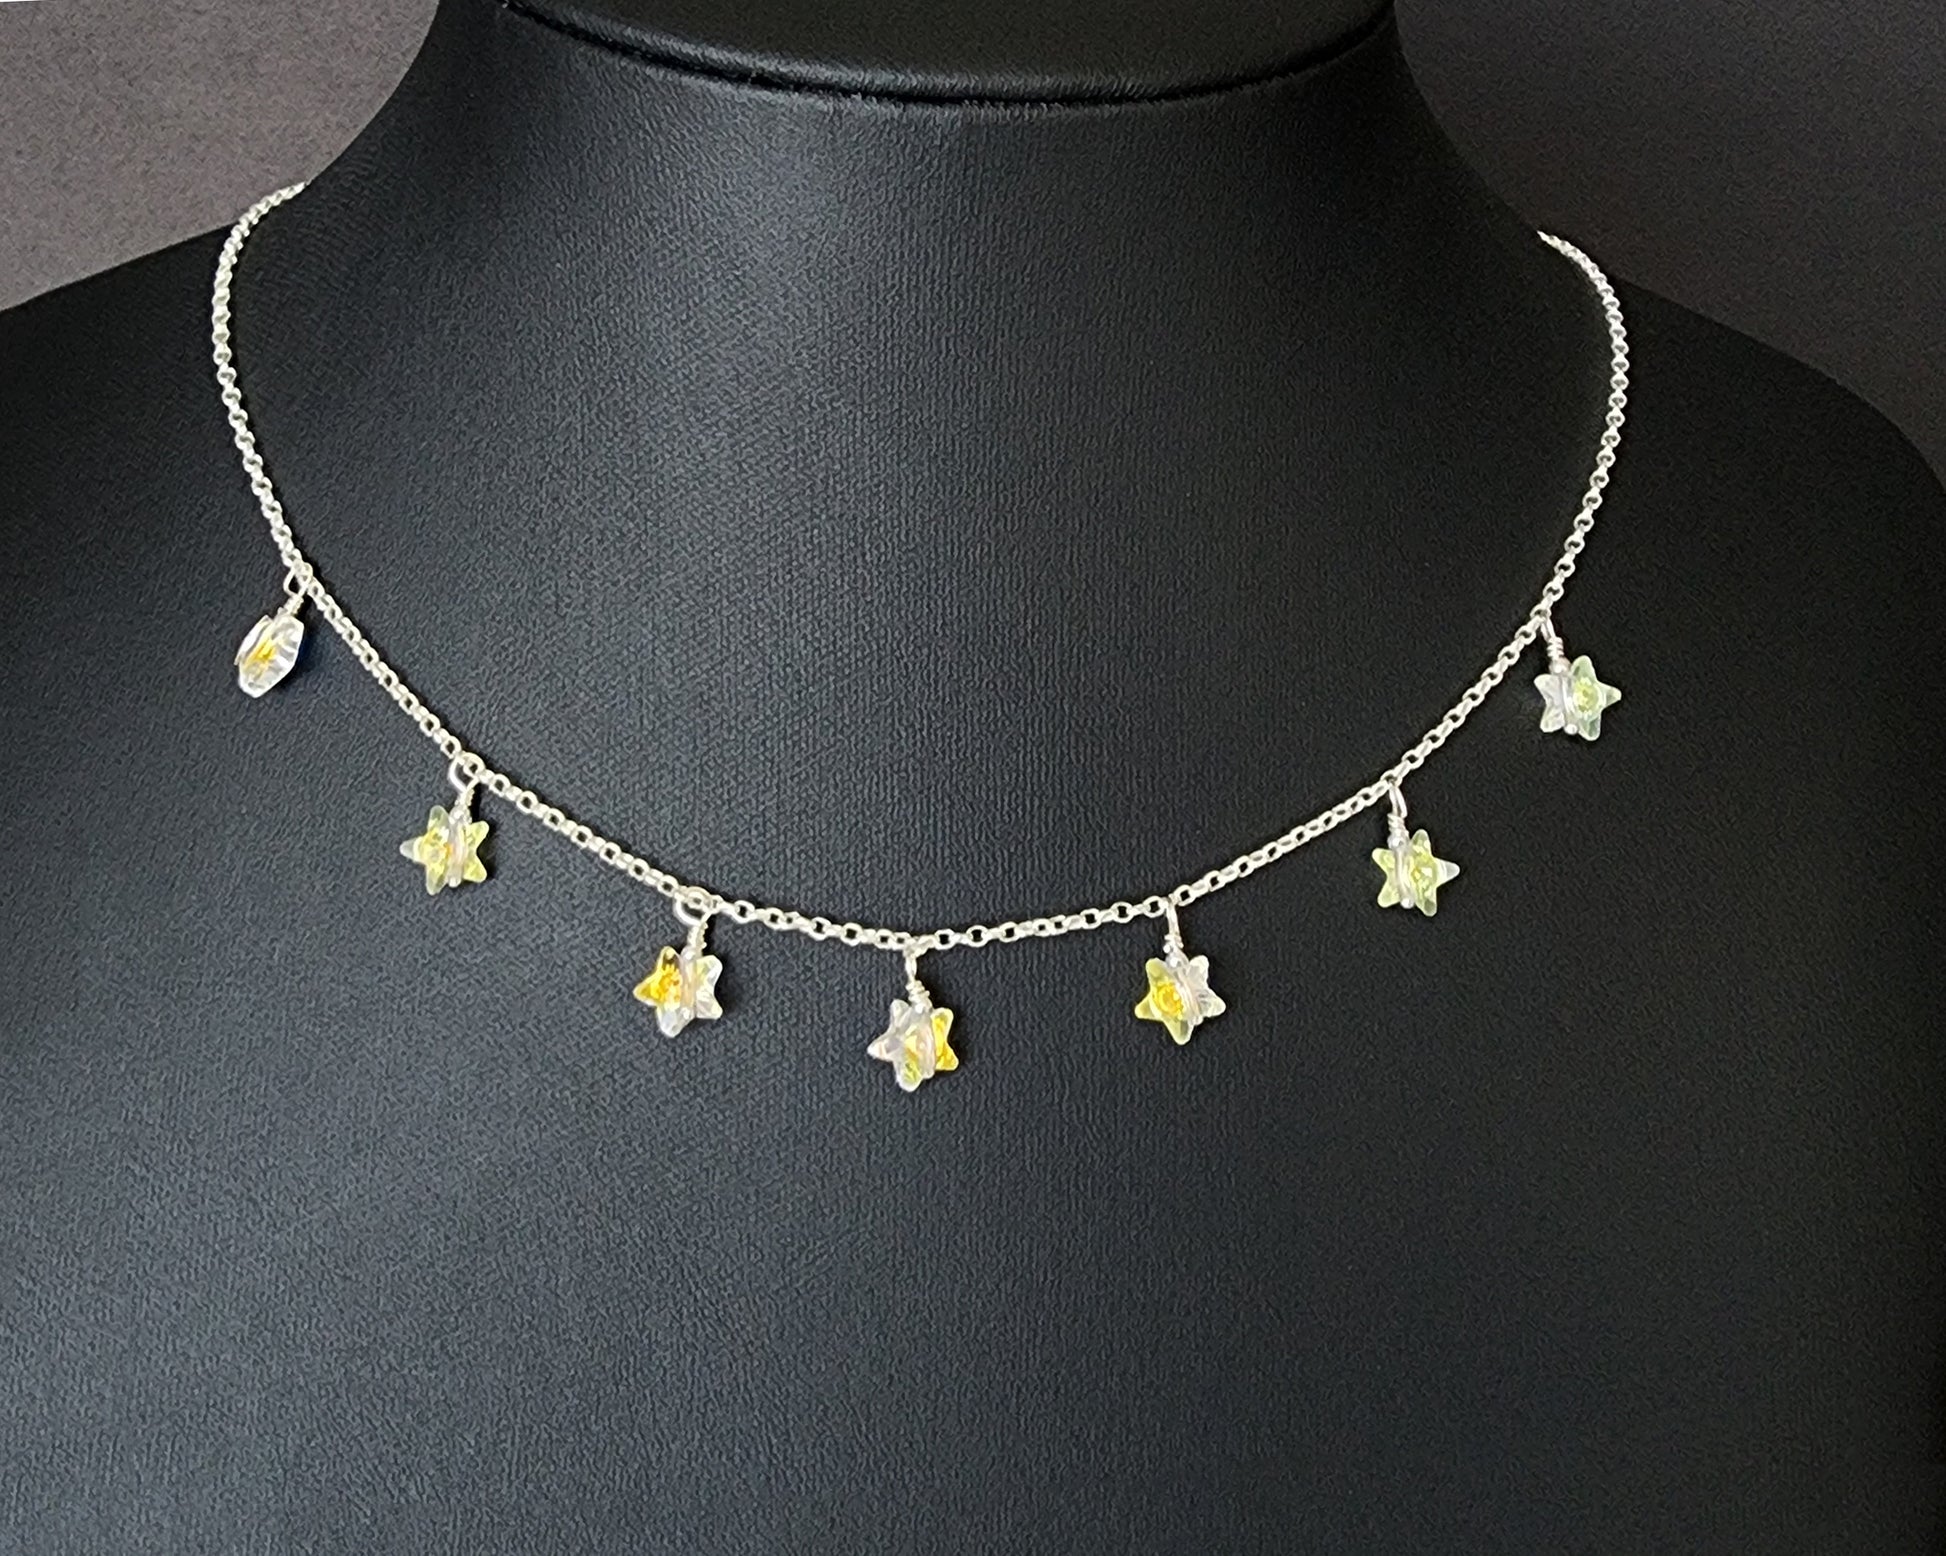 Brilliant Seven Stars Crystal Dangle Necklace with seven clear AB Austrian Crystal Stars on Sterling Silver chain.  